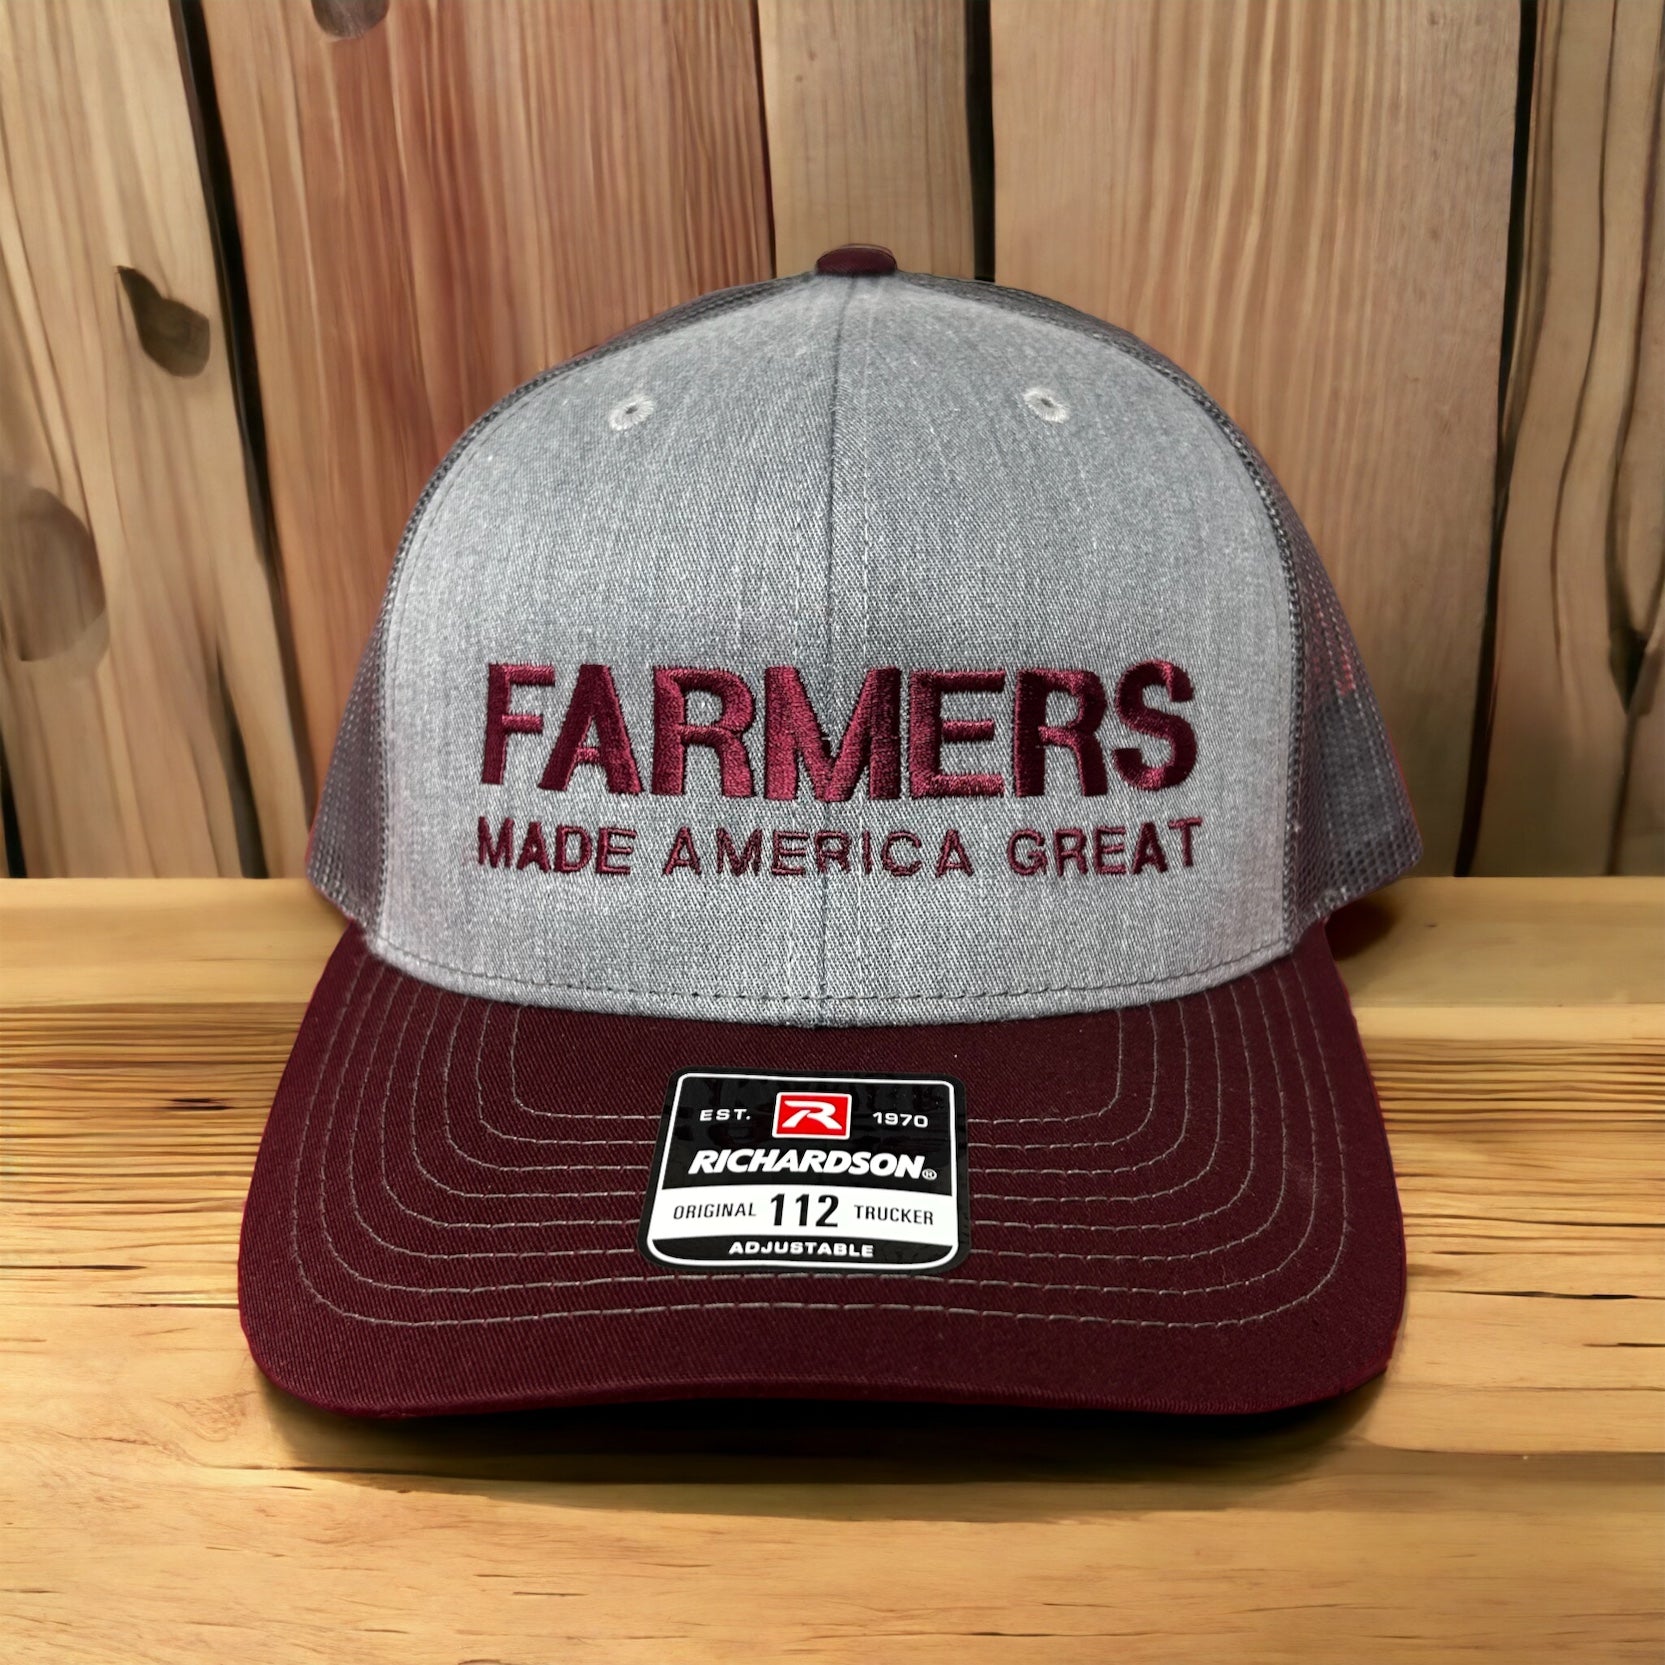 Famers Made America Great Structured Hat